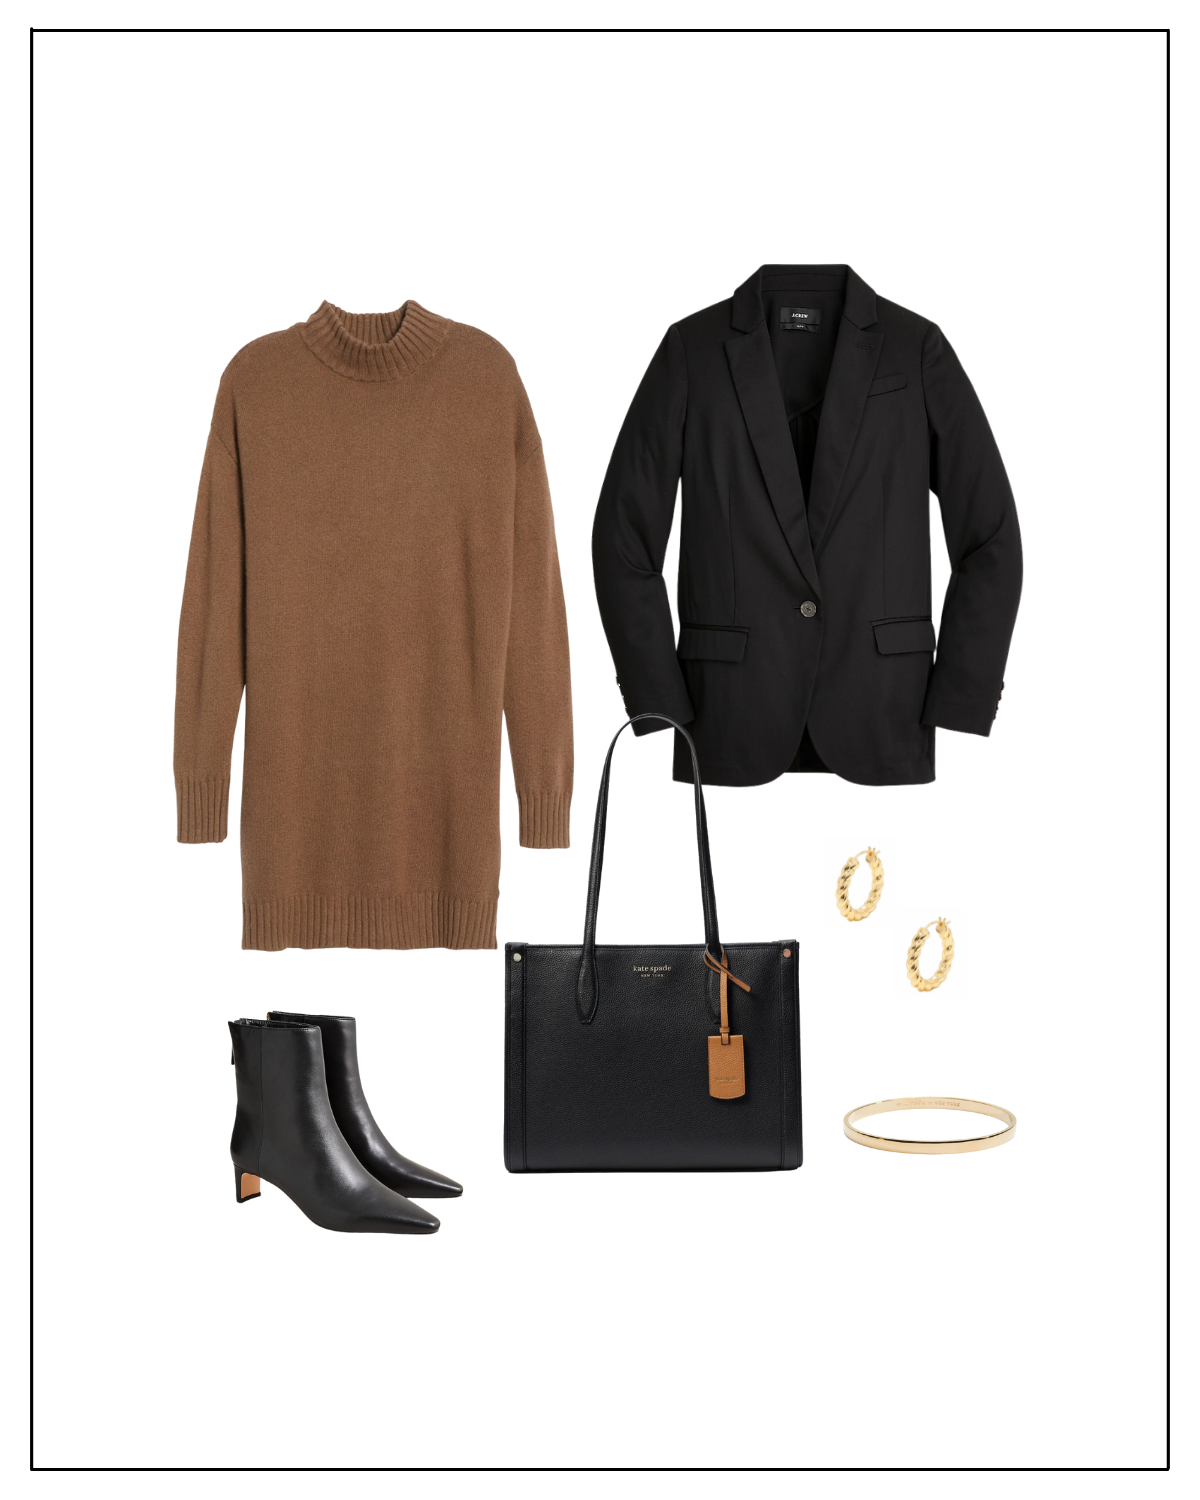 How to Style a Black Blazer with a sweater dress